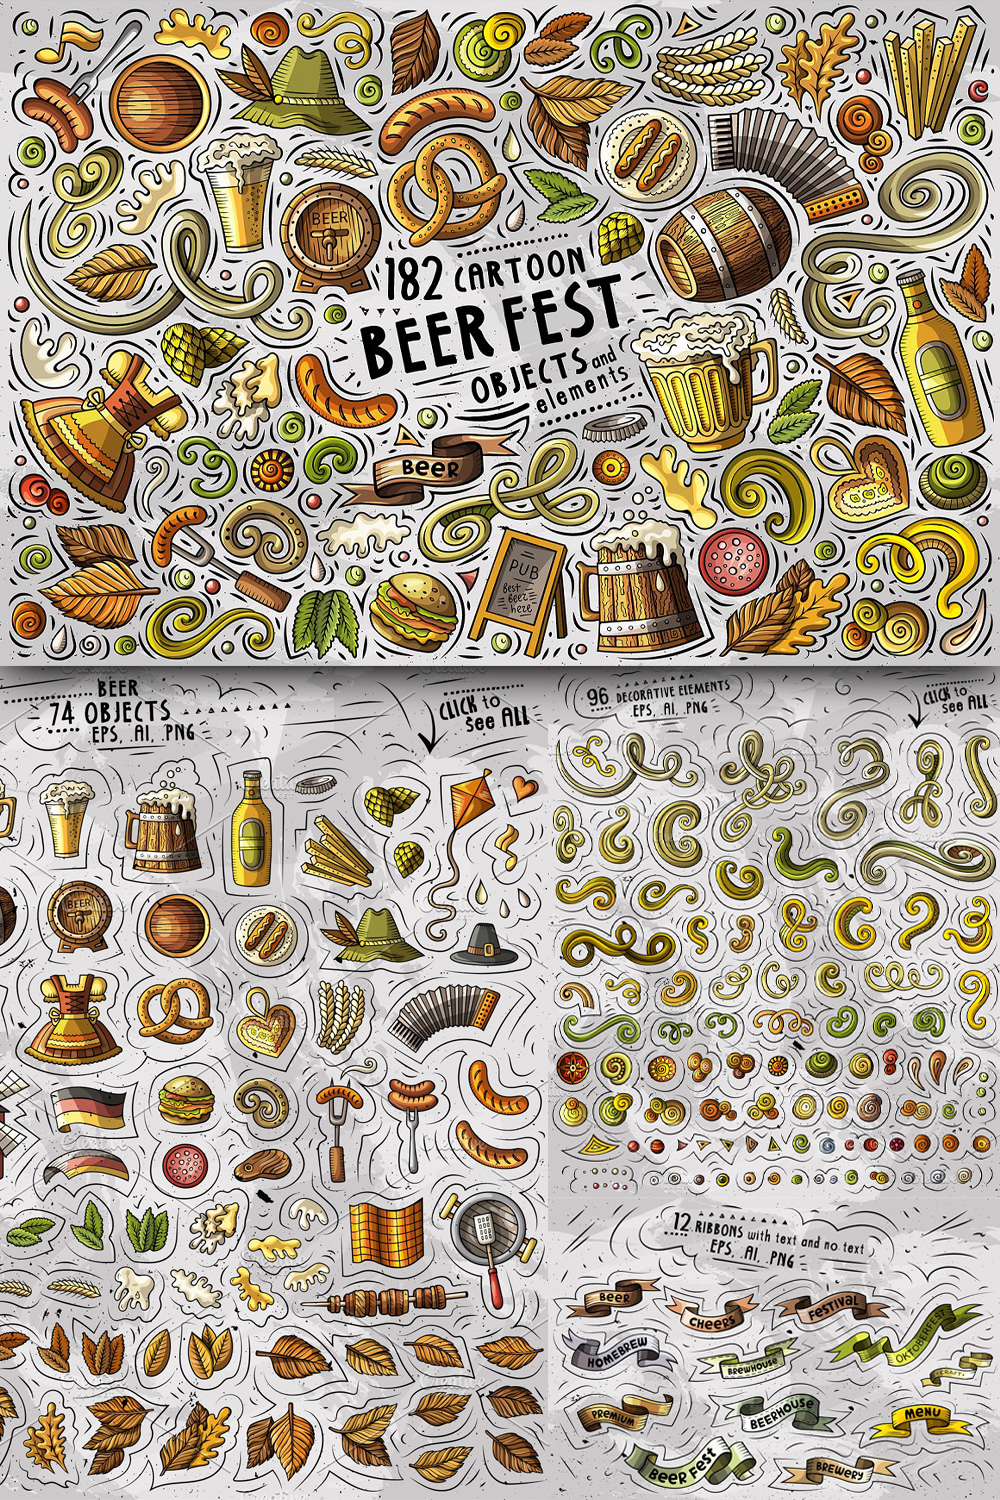 Beer fest objects set.